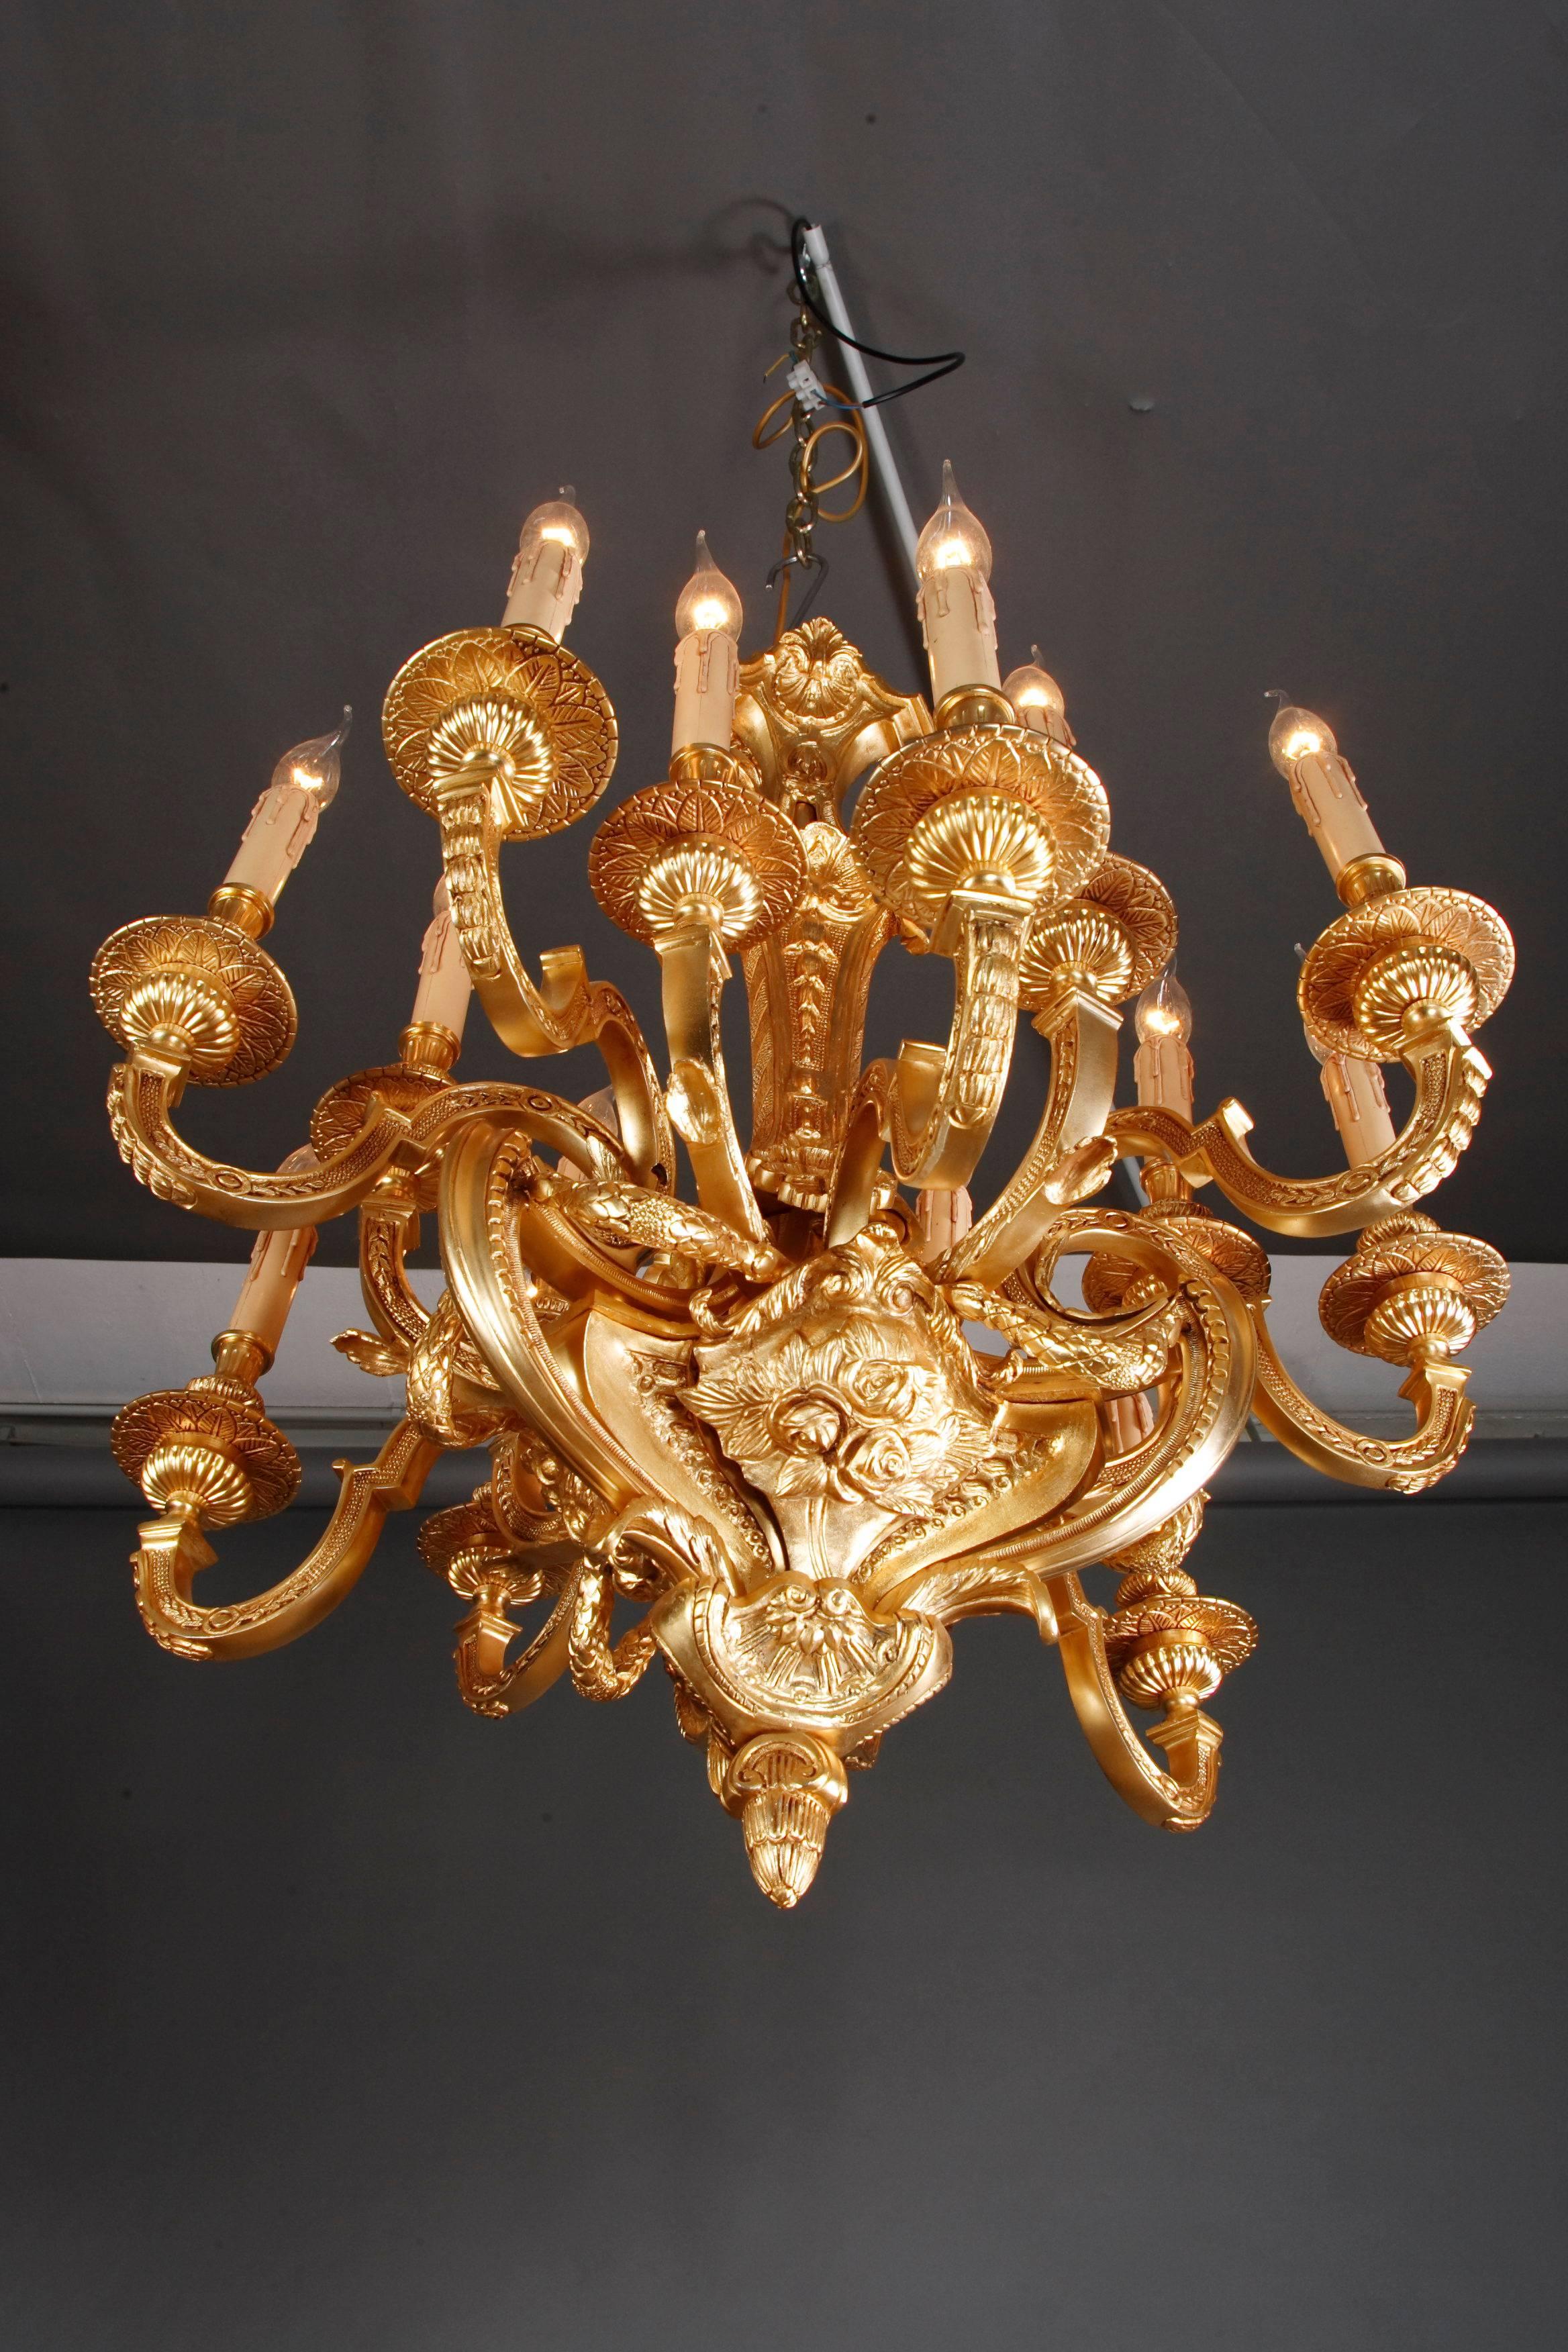 20th century Louis XIV ceiling candelabra/ chandelier 
Ceiling candelabra in Louis XIV style.
Solid, engraved brass. Fifteen curved light arms.

Delivery time can take about 6-8 weeks

(F-Kan-1).